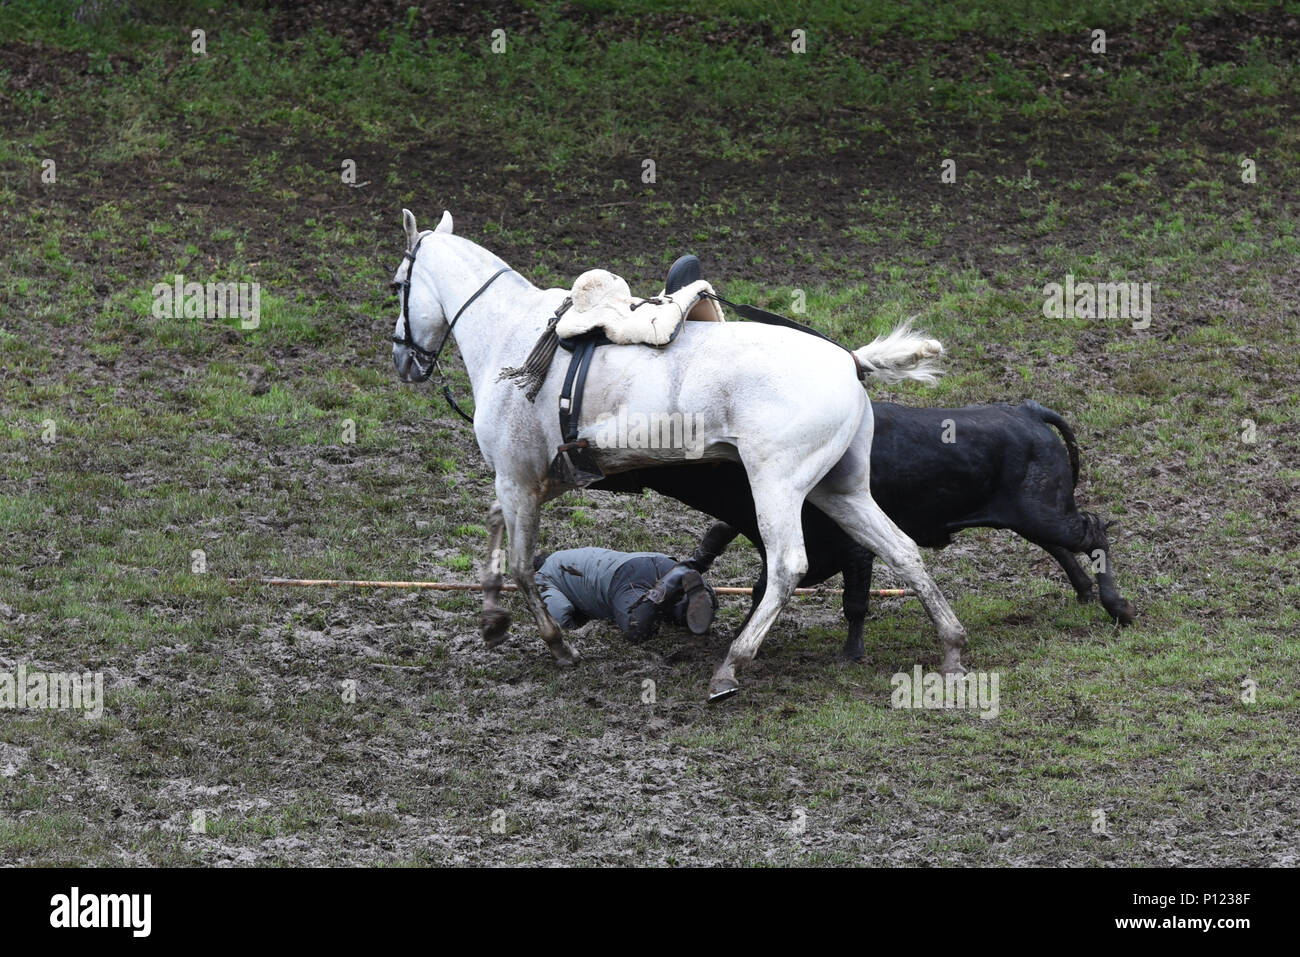 Soria Spain 09th June 18 A Bull Gores A Horse During The Lavalenguas Festival At Valonsadero Mount In Soria North Of Spain Credit Jorge Sanz Pacific Press Alamy Live News Stock Photo Alamy